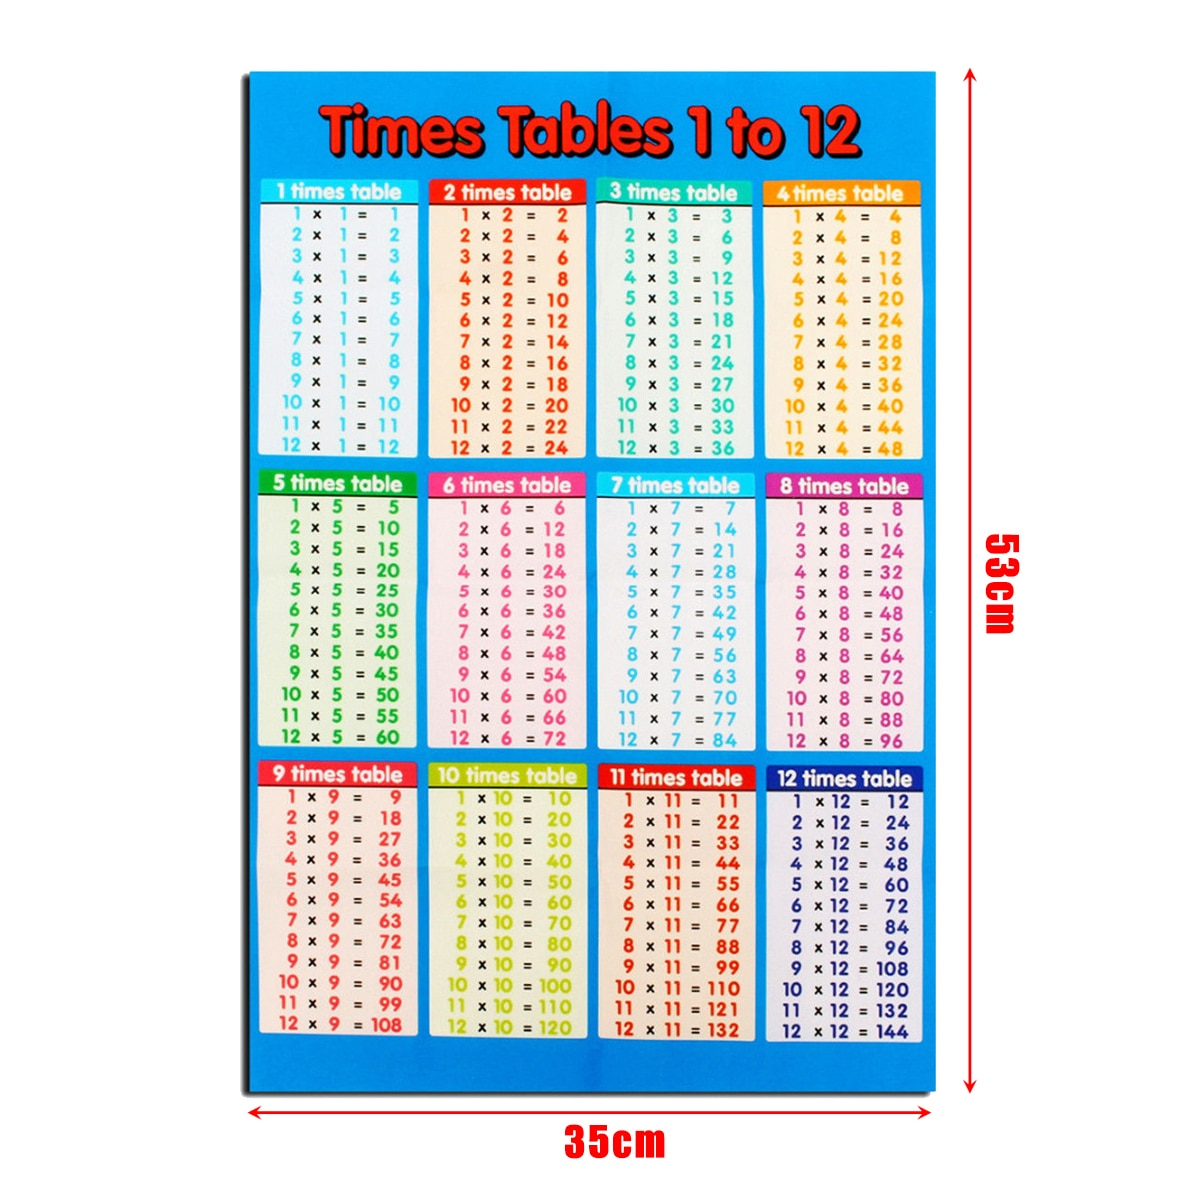 Us $2.66 25% Off|Multiplication Table Poster Family Educational Times  Tables Maths Children Wall Chart Poster For Paste In The Living  Room|Painting &amp;amp;